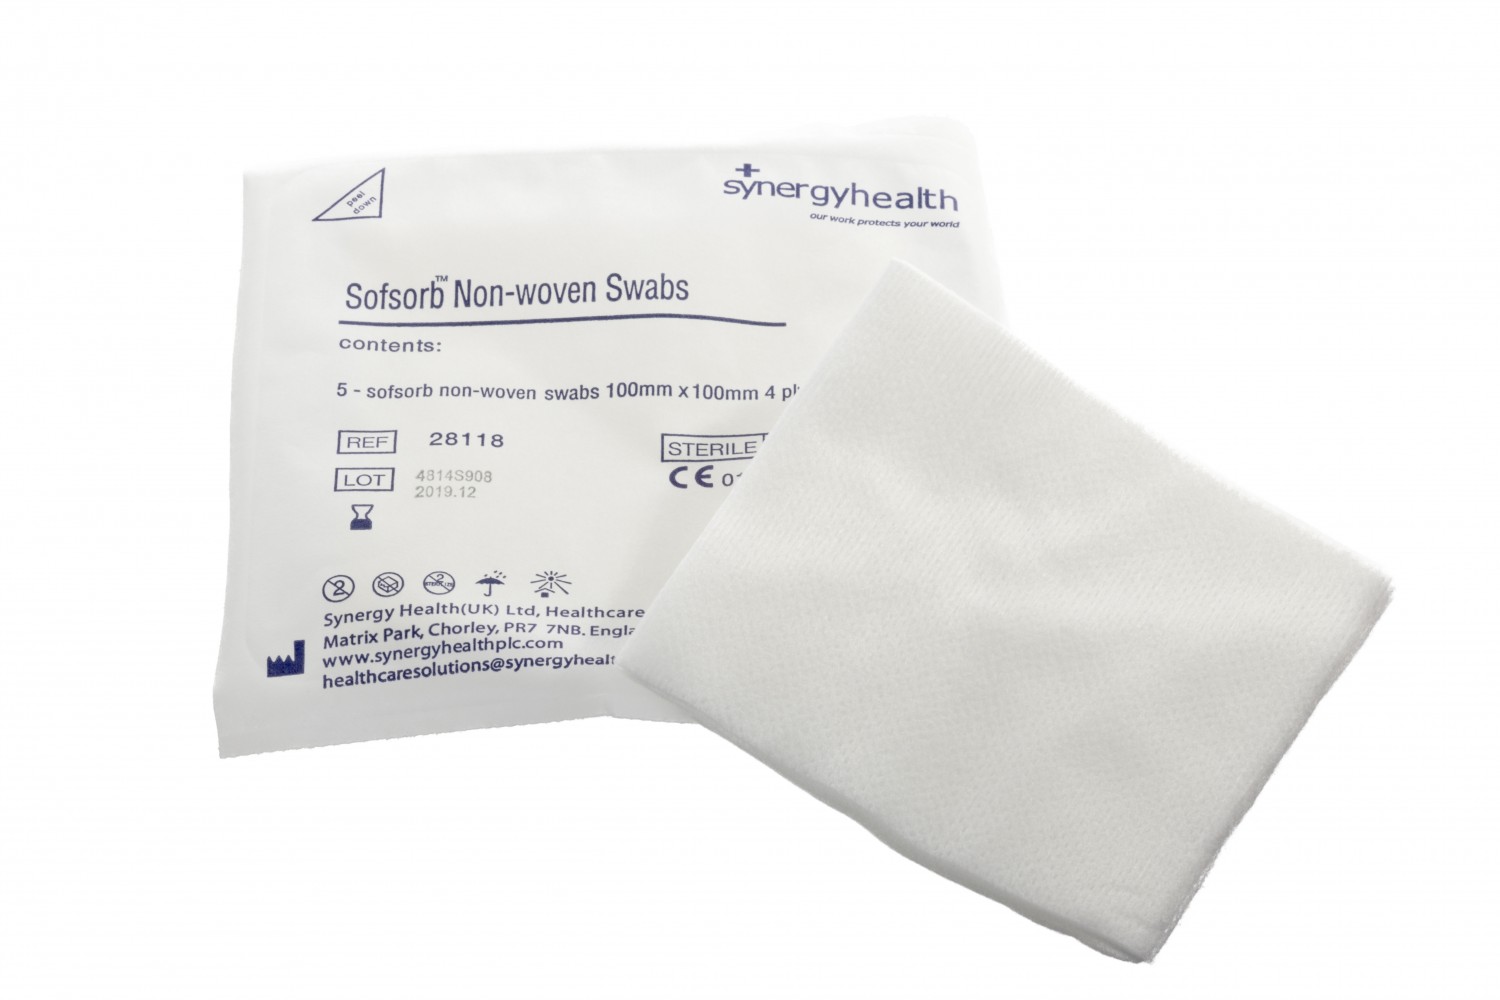 Sofsorb NON-WOVEN SWABS image cover